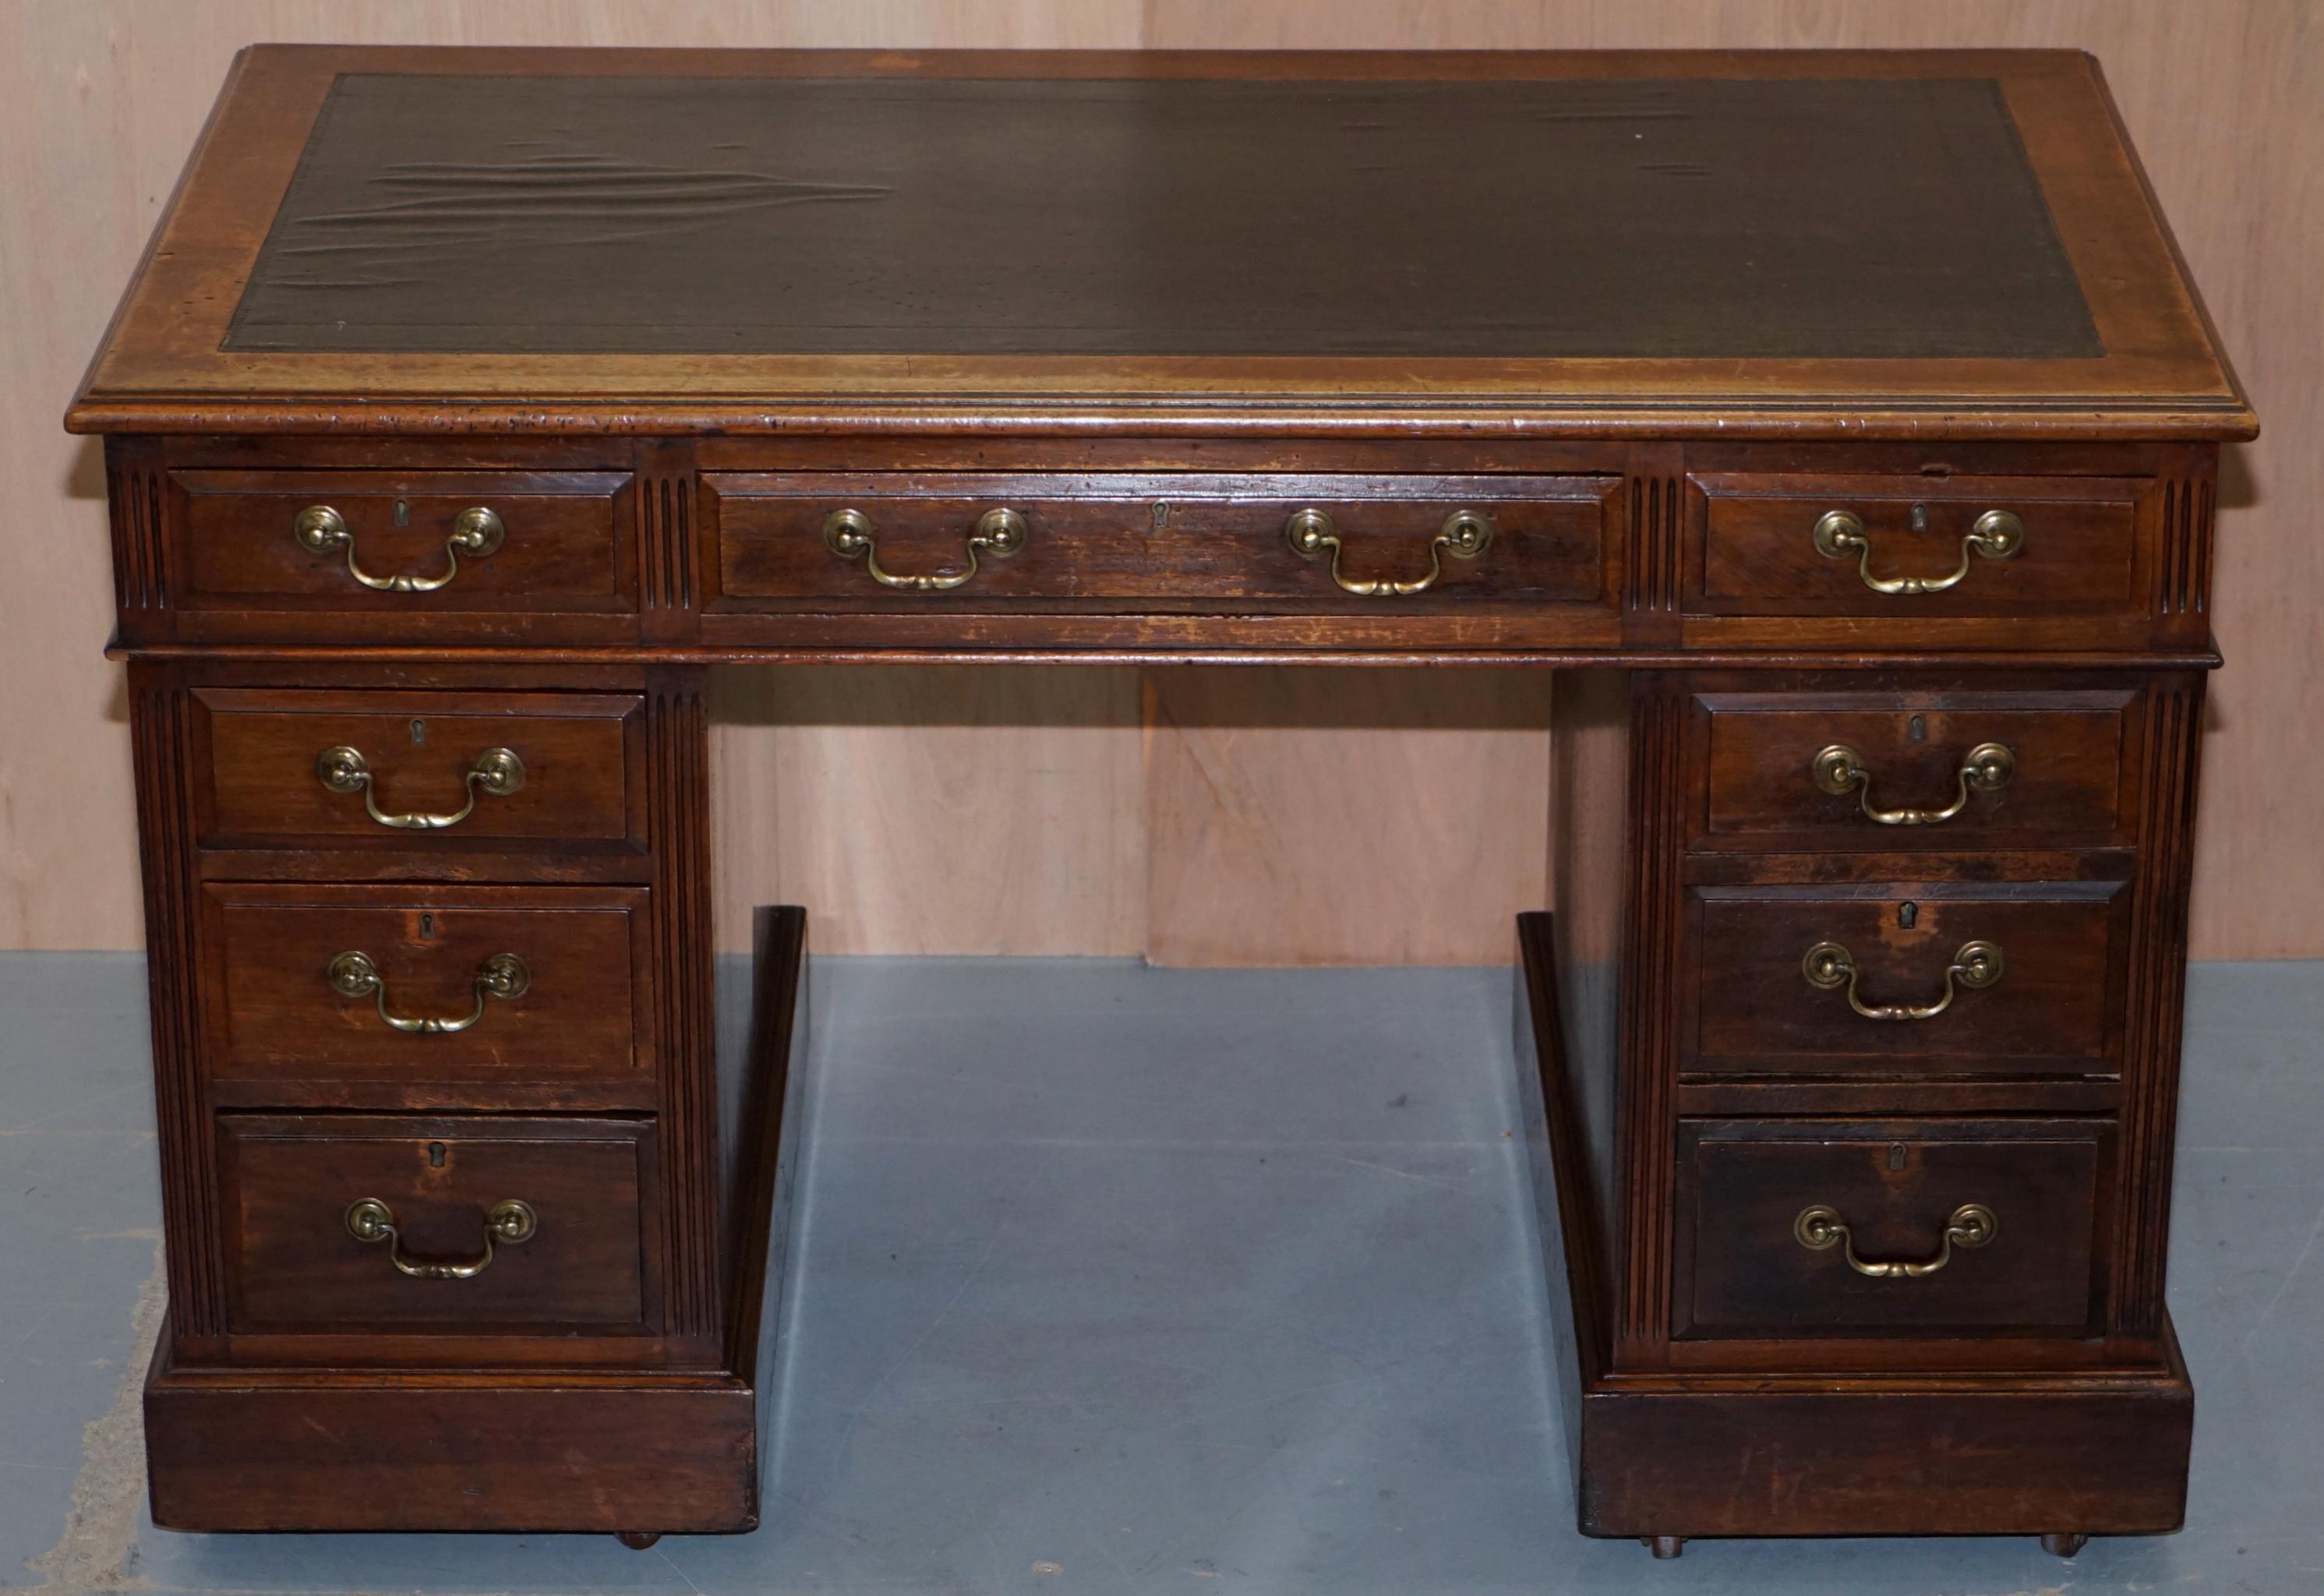 We are delighted to offer for sale this lovely English paneled Mahogany Victorian Circa 1880 twin pedestal partner desk with original fittings and brass castors 

A good looking and well made desk in period lightly restored condition throughout.